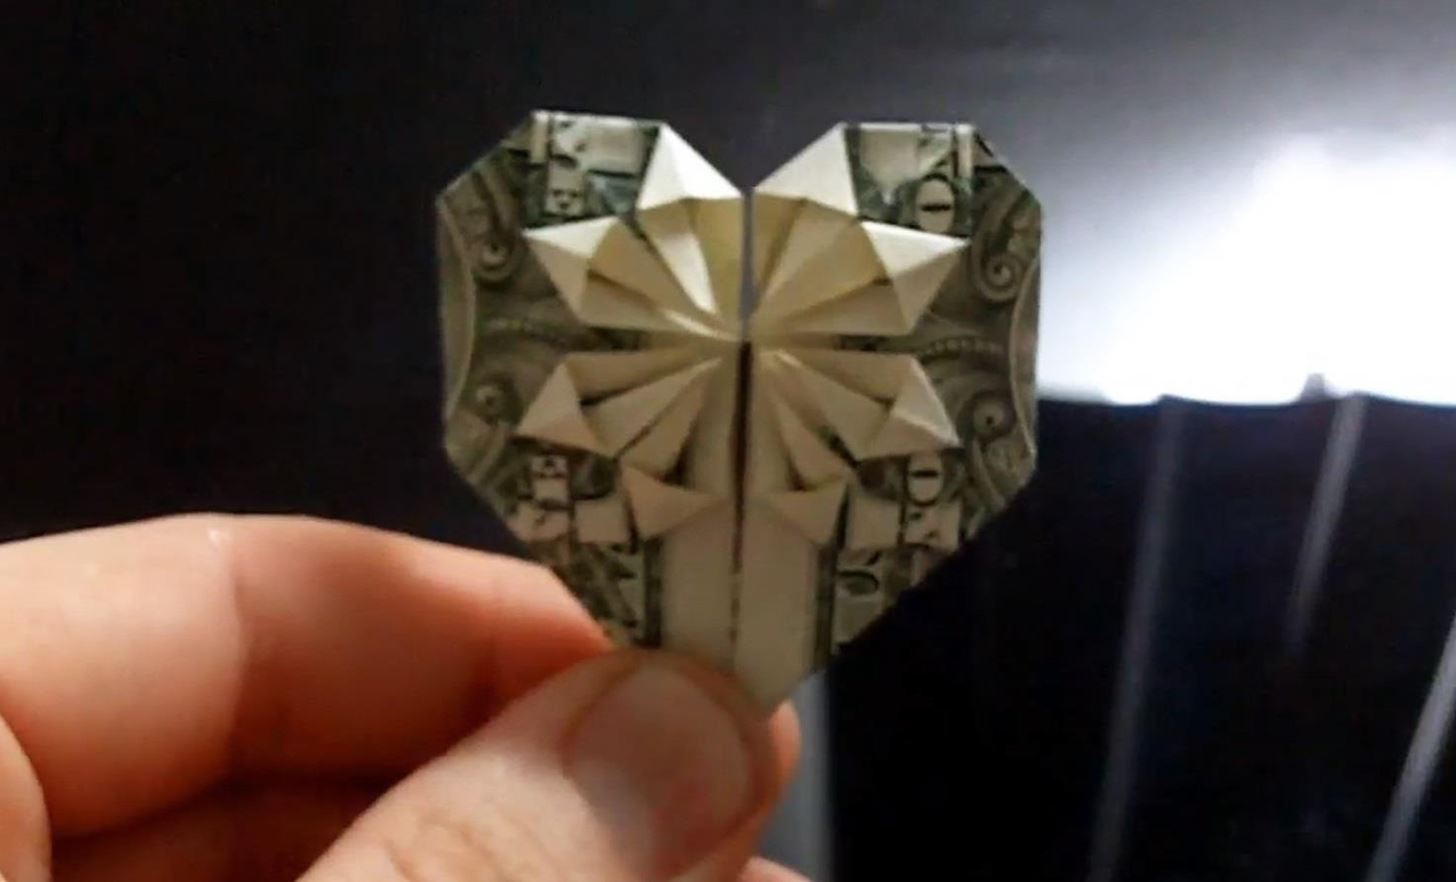 Origami Money Ideas 10 Easy Last Minute Origami Projects For Valentines Day Origami